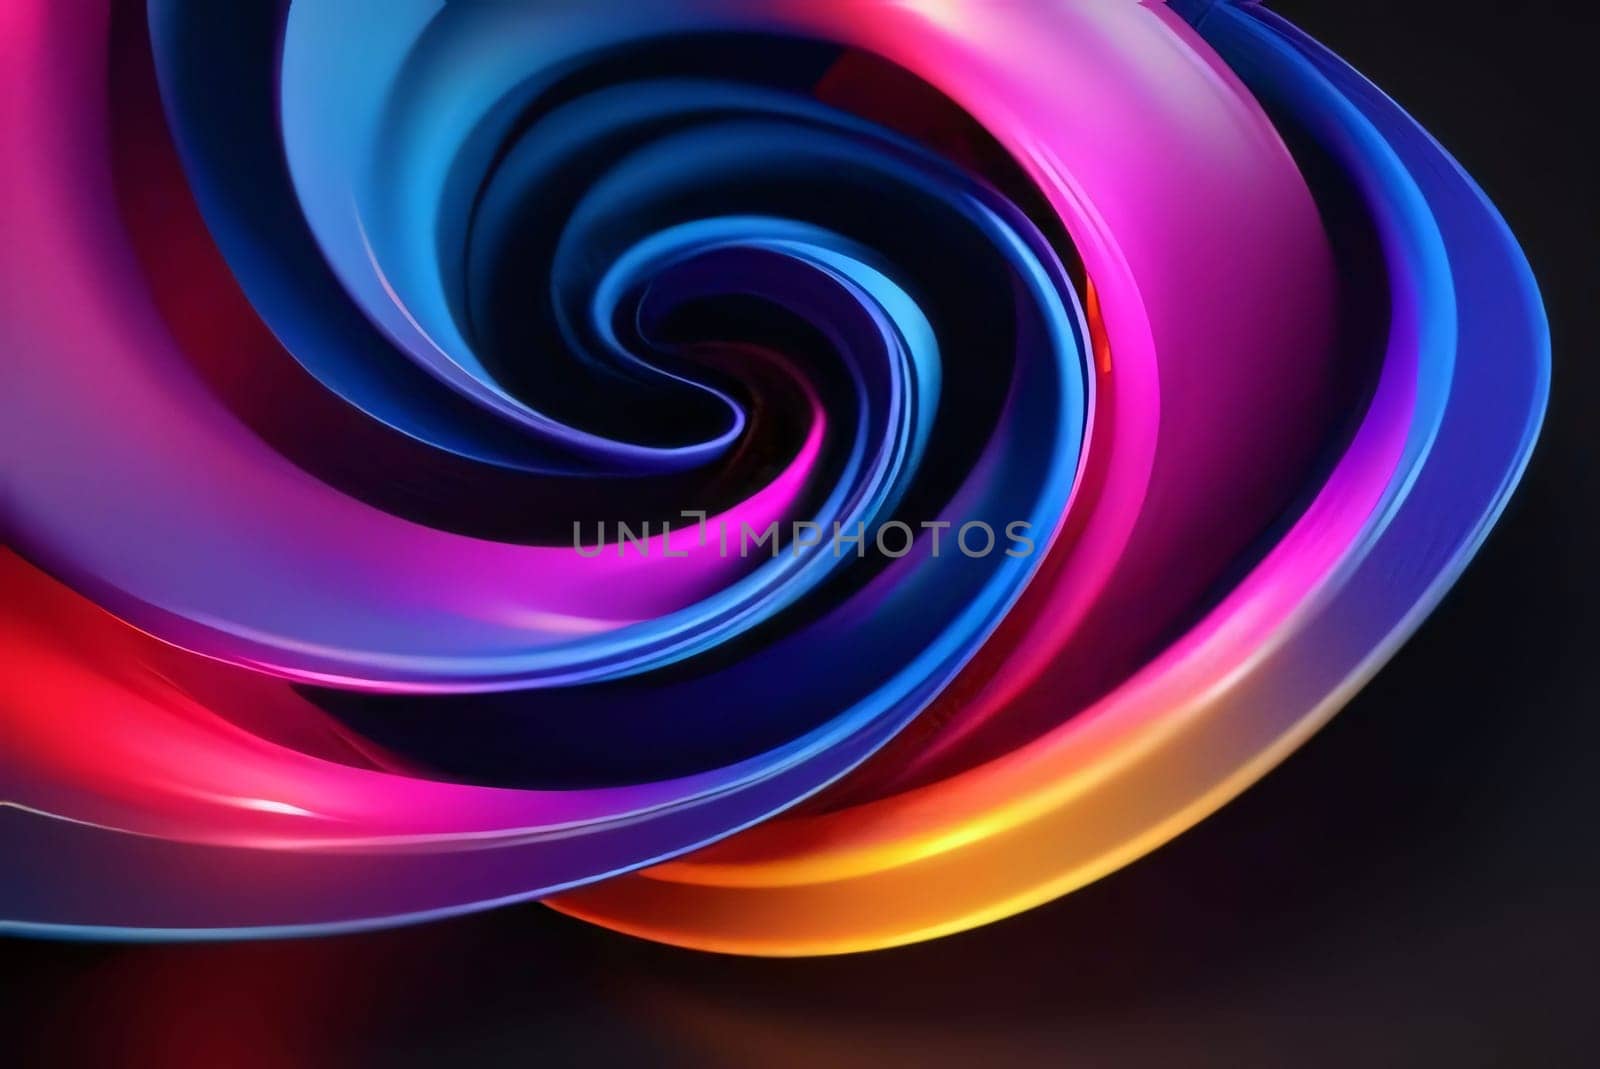 Abstract background design: 3d rendering of colorful swirls on black background. Computer generated abstract background.